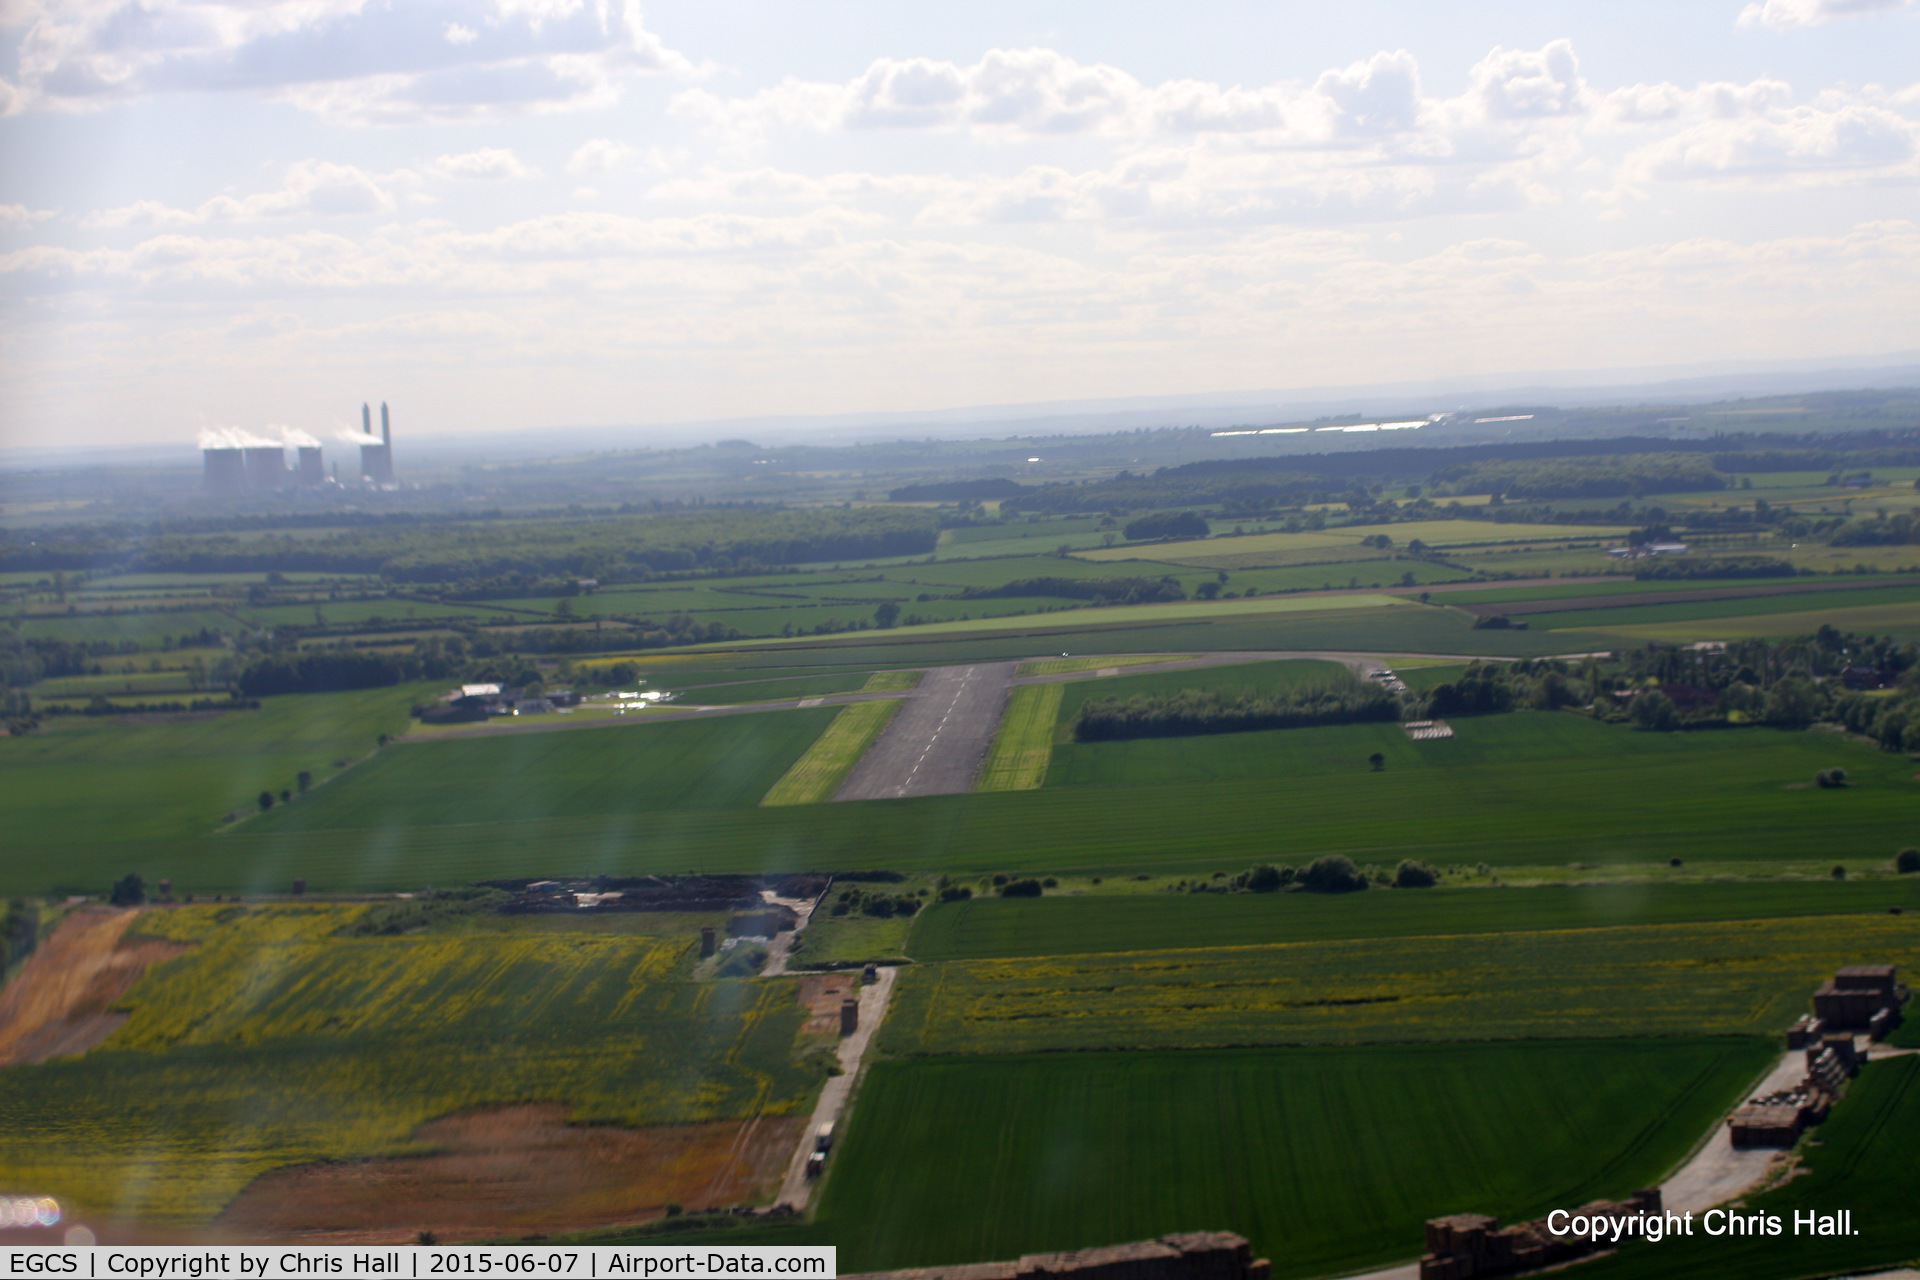 Sturgate Airfield Airport, Lincoln, England United Kingdom (EGCS) - on finals to RW27, 820 mtrs long